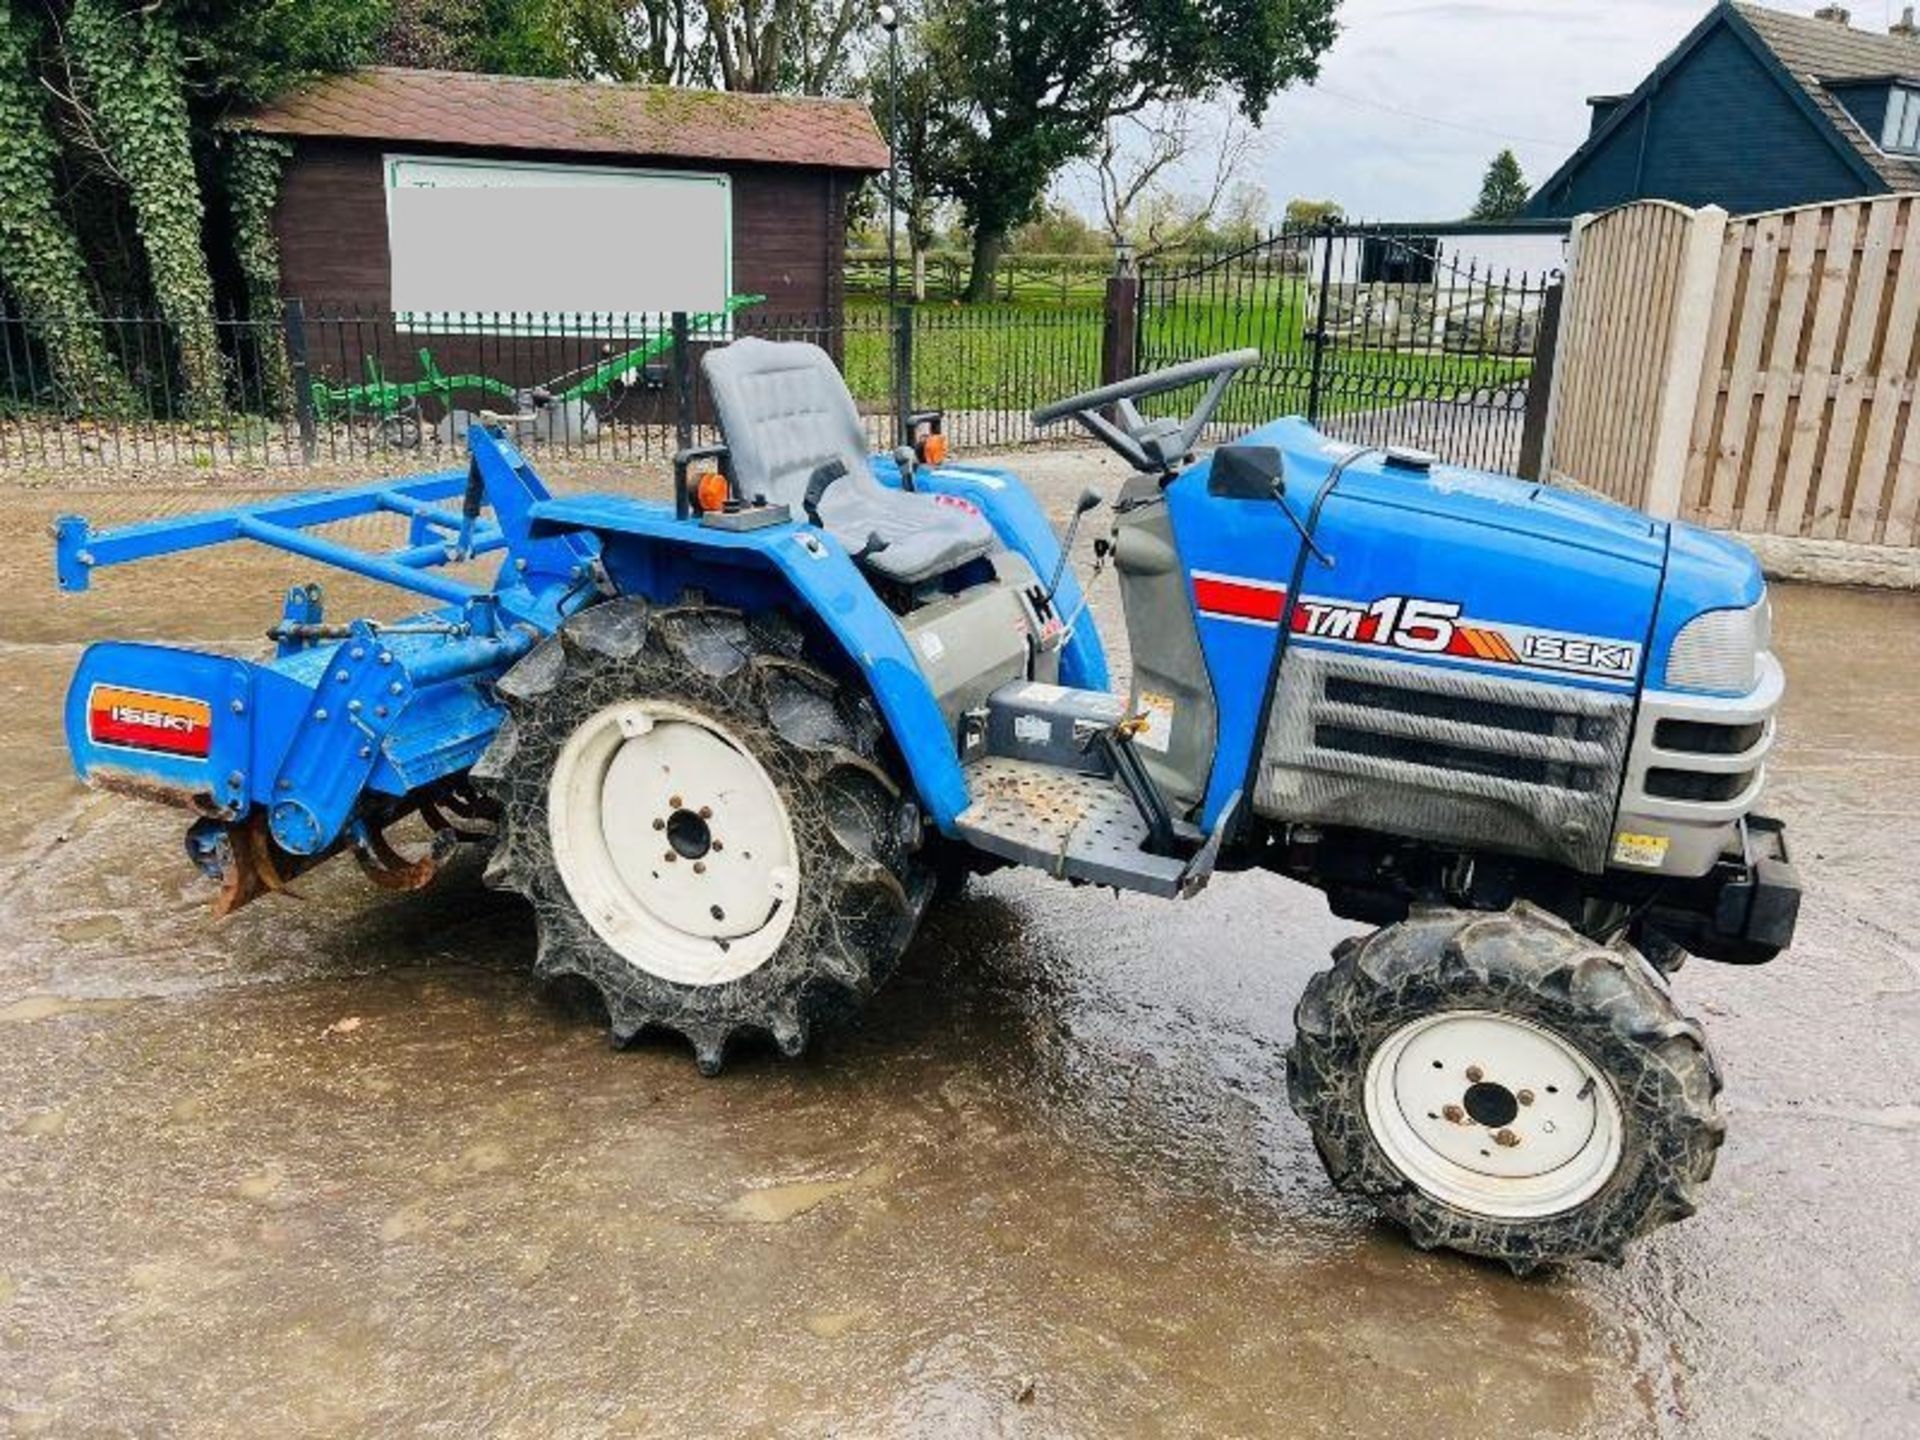 ISEKI TM15 4WD COMPACT TRACTOR C/W REAR ROTAVATOR - Image 10 of 12